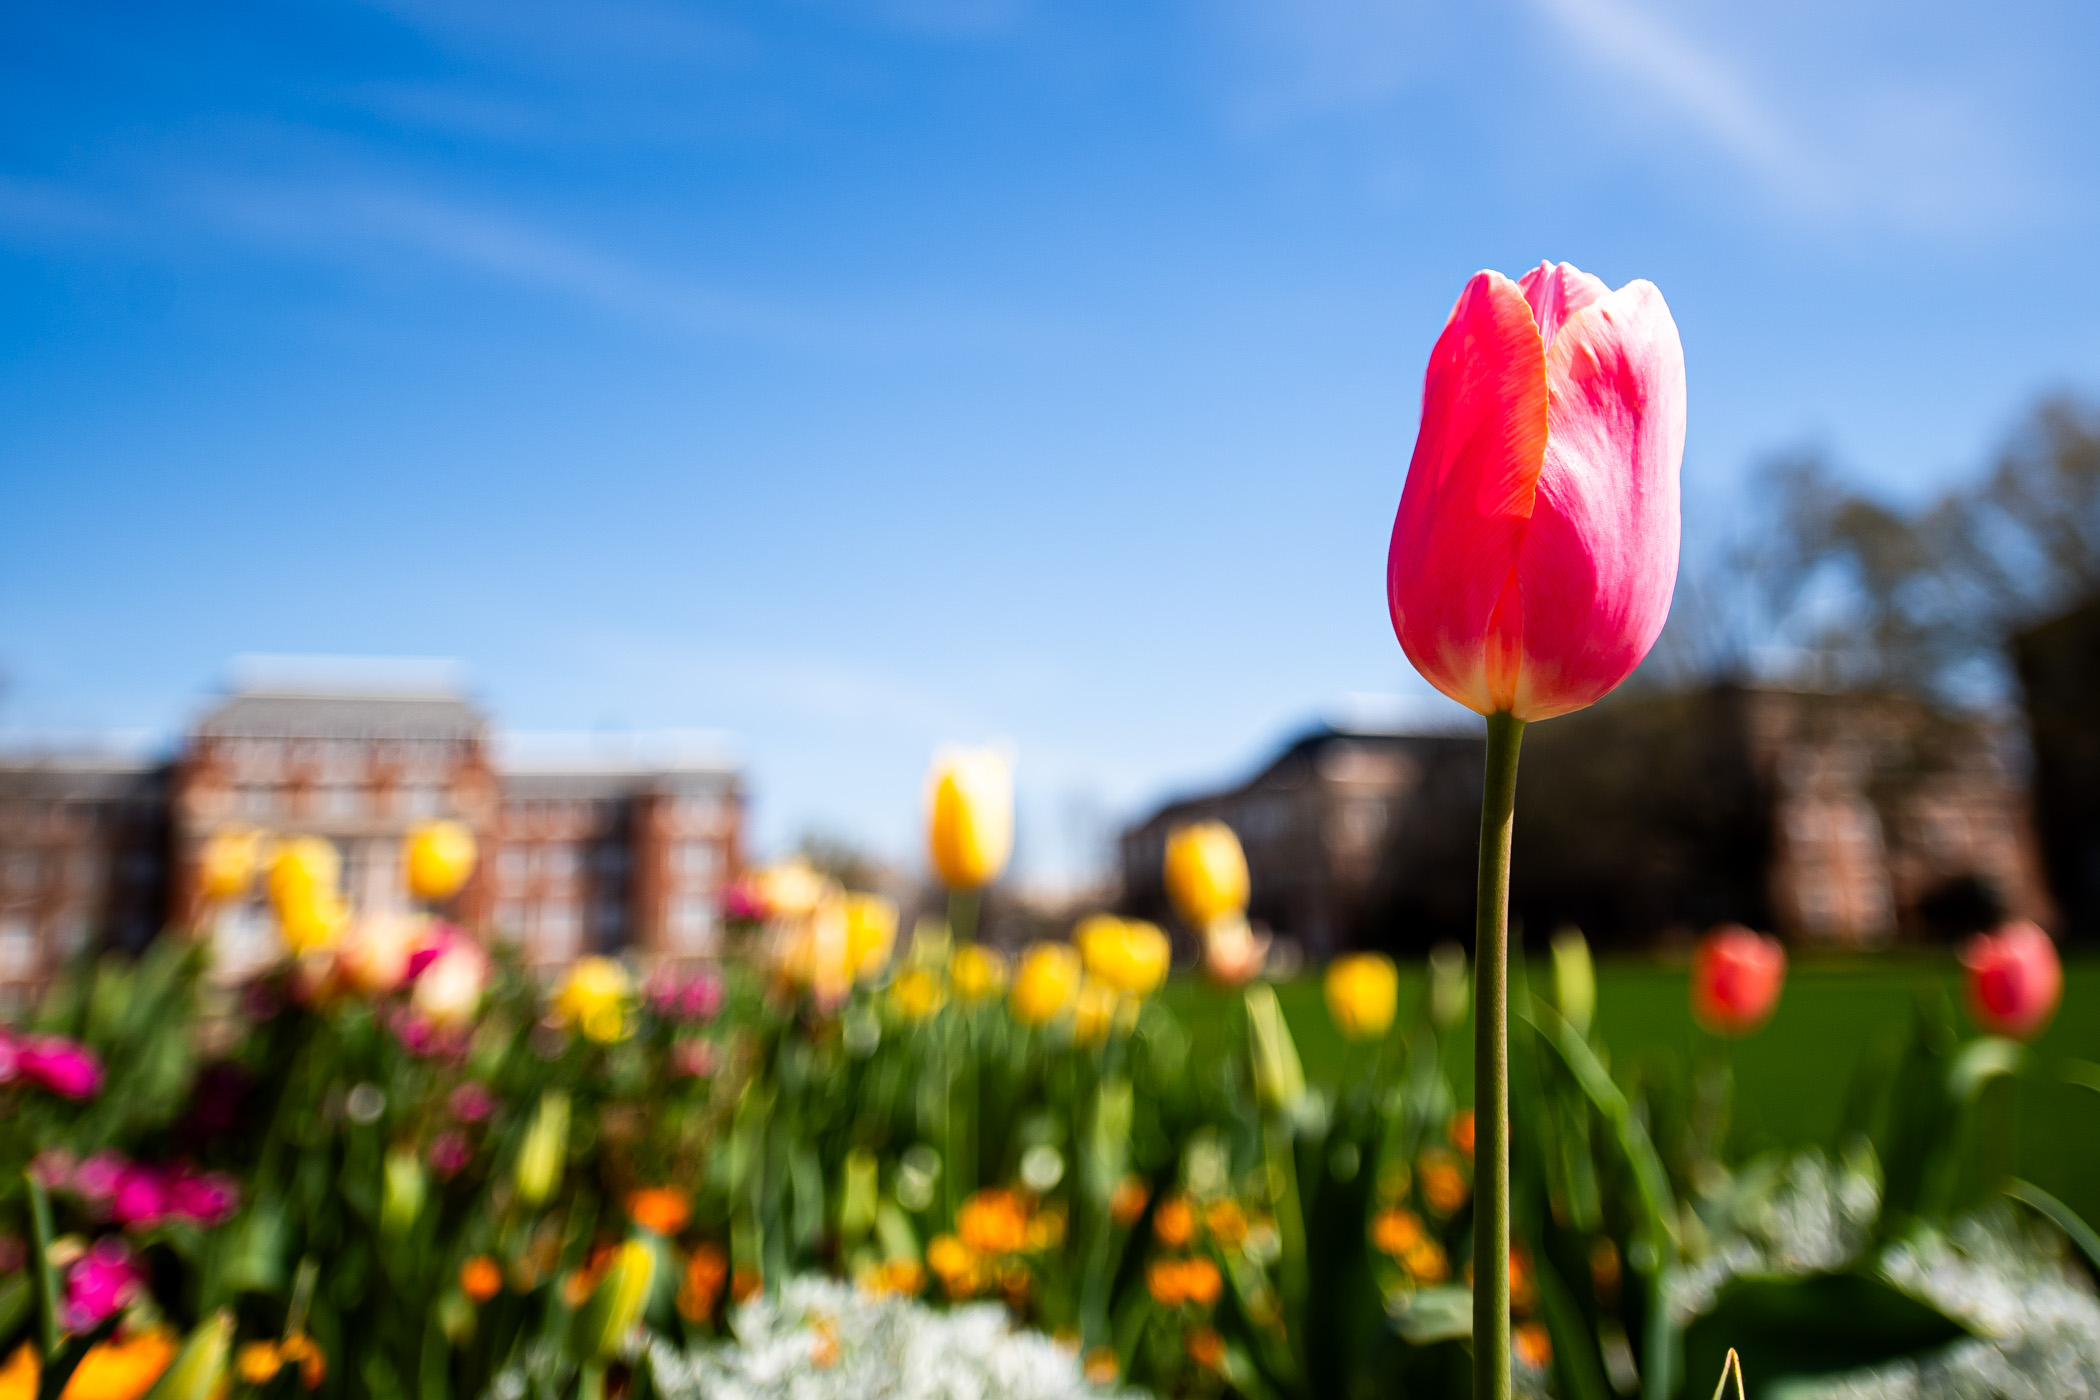 Pink and yellow tulips stand tall at the center of the Drill Field, catching warm sunlight on the first day of spring